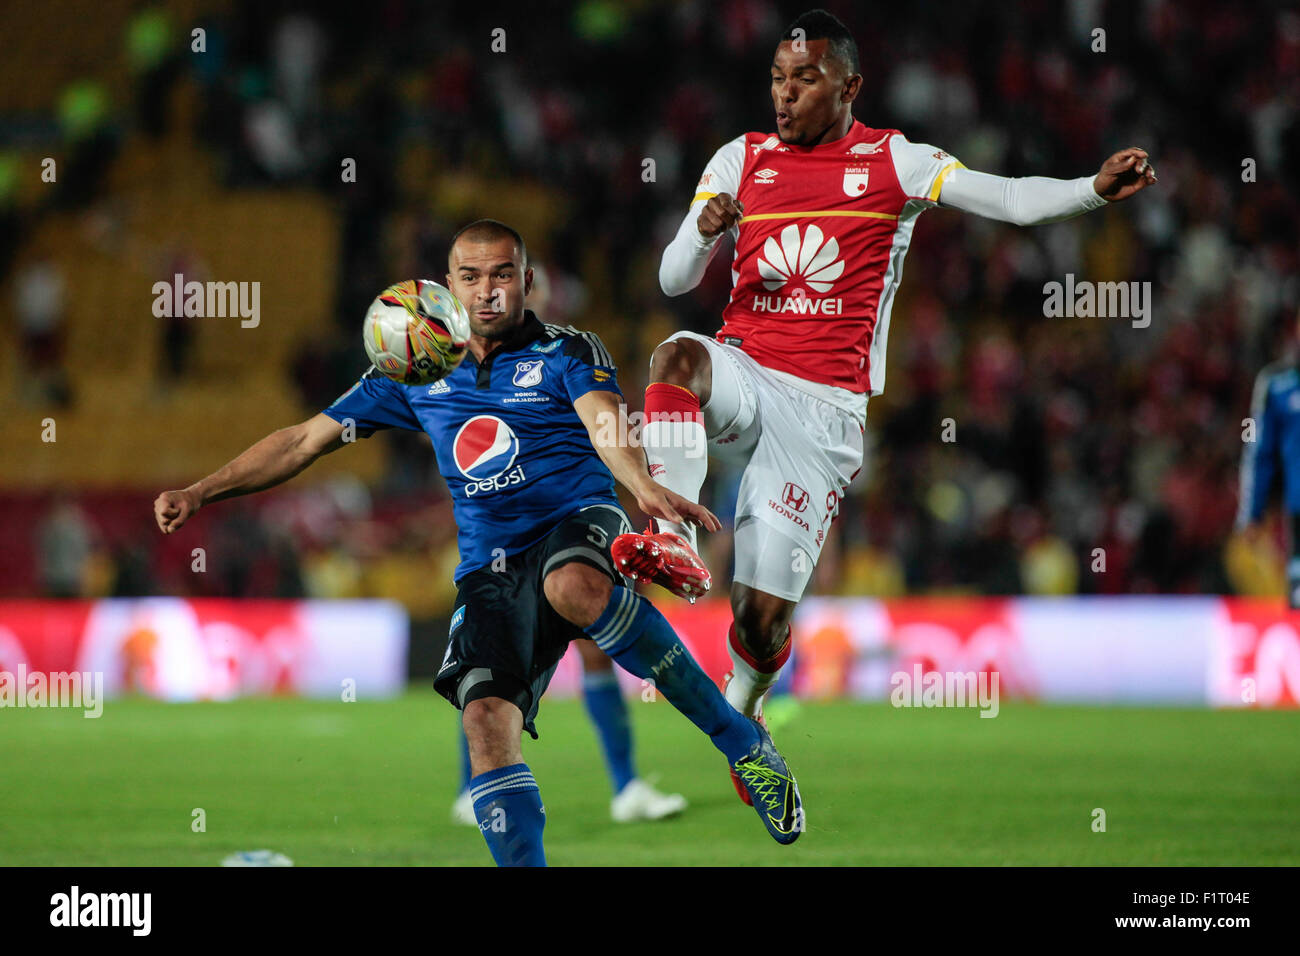 Bogota, Colombia. 6th Sep, 2015. Santa Fe's Luis Quinones (R) vies for the ball with Oswaldo Henriquez of Millonarios during a match held in the Nemesio Camacho Stadium, in the city of Bogota, Colombia, on Sept. 6, 2015. Credit:  Jhon Paz/Xinhua/Alamy Live News Stock Photo